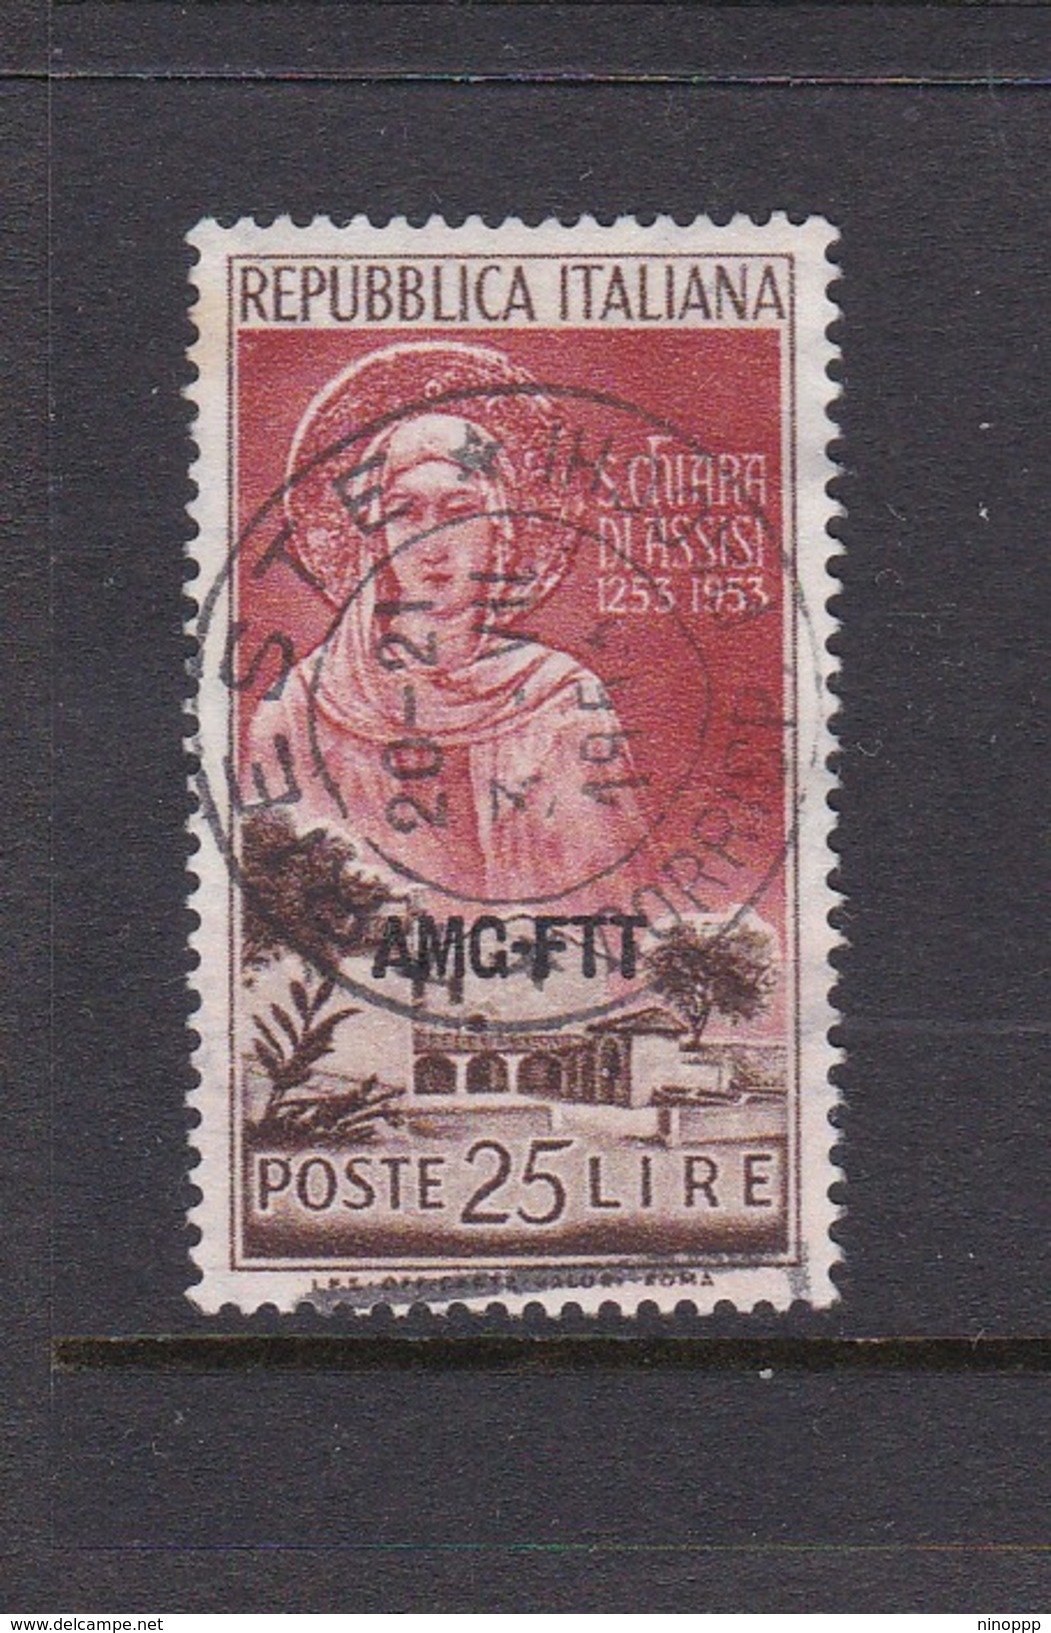 Trieste Allied Military Government S 177 1953 7th Death Centenary Of St Claire, Used - Used